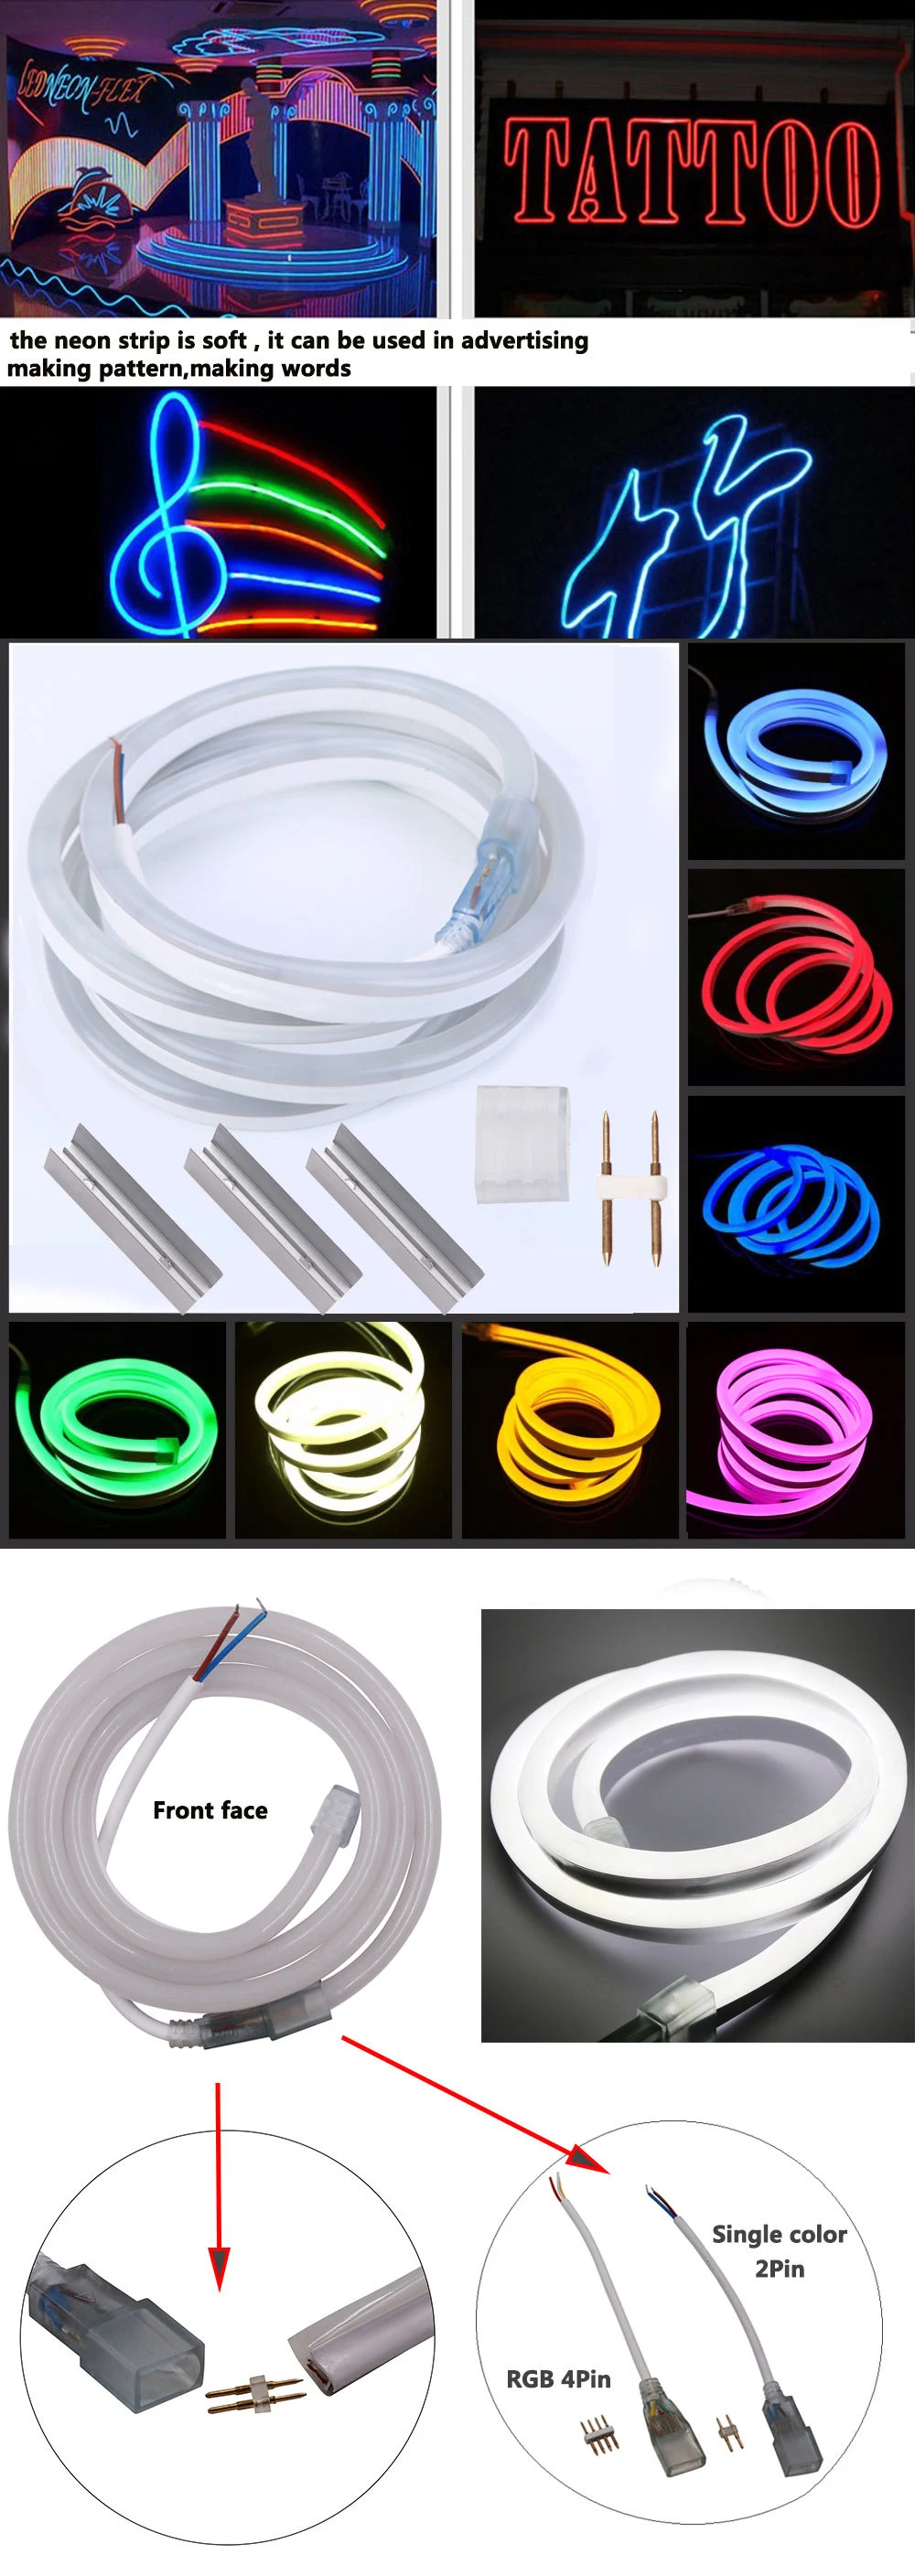 RGB Neon LED Strip Light 12V 24V Flexible Silicone Neon Strip SMD 2835 120LEDs/M Cuttable IP65 Waterproof RGB for LED Neon Sign